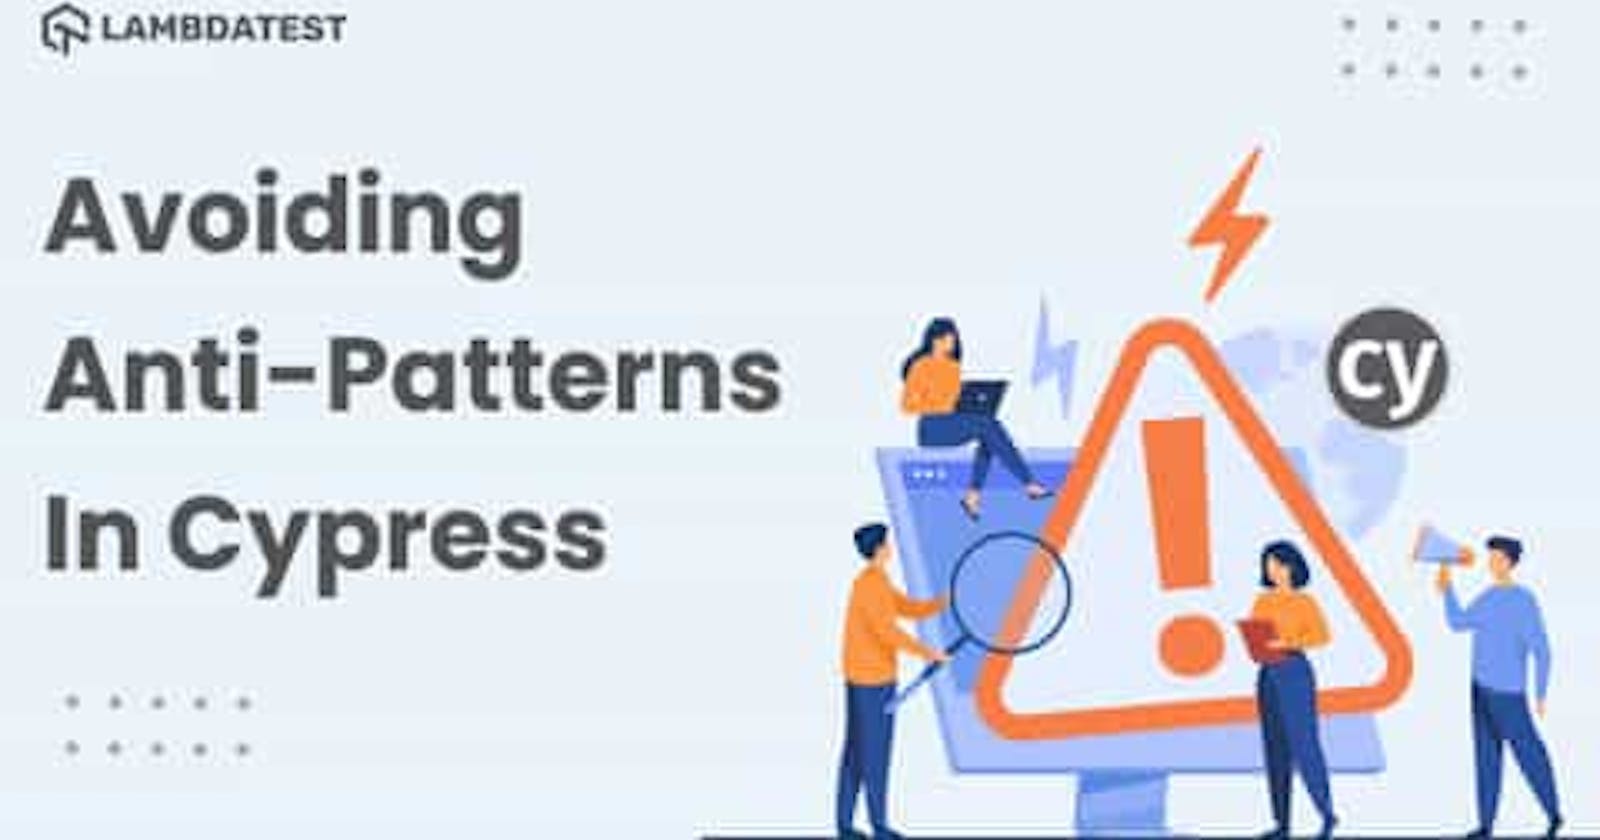 How To Avoid Anti-Patterns In Cypress